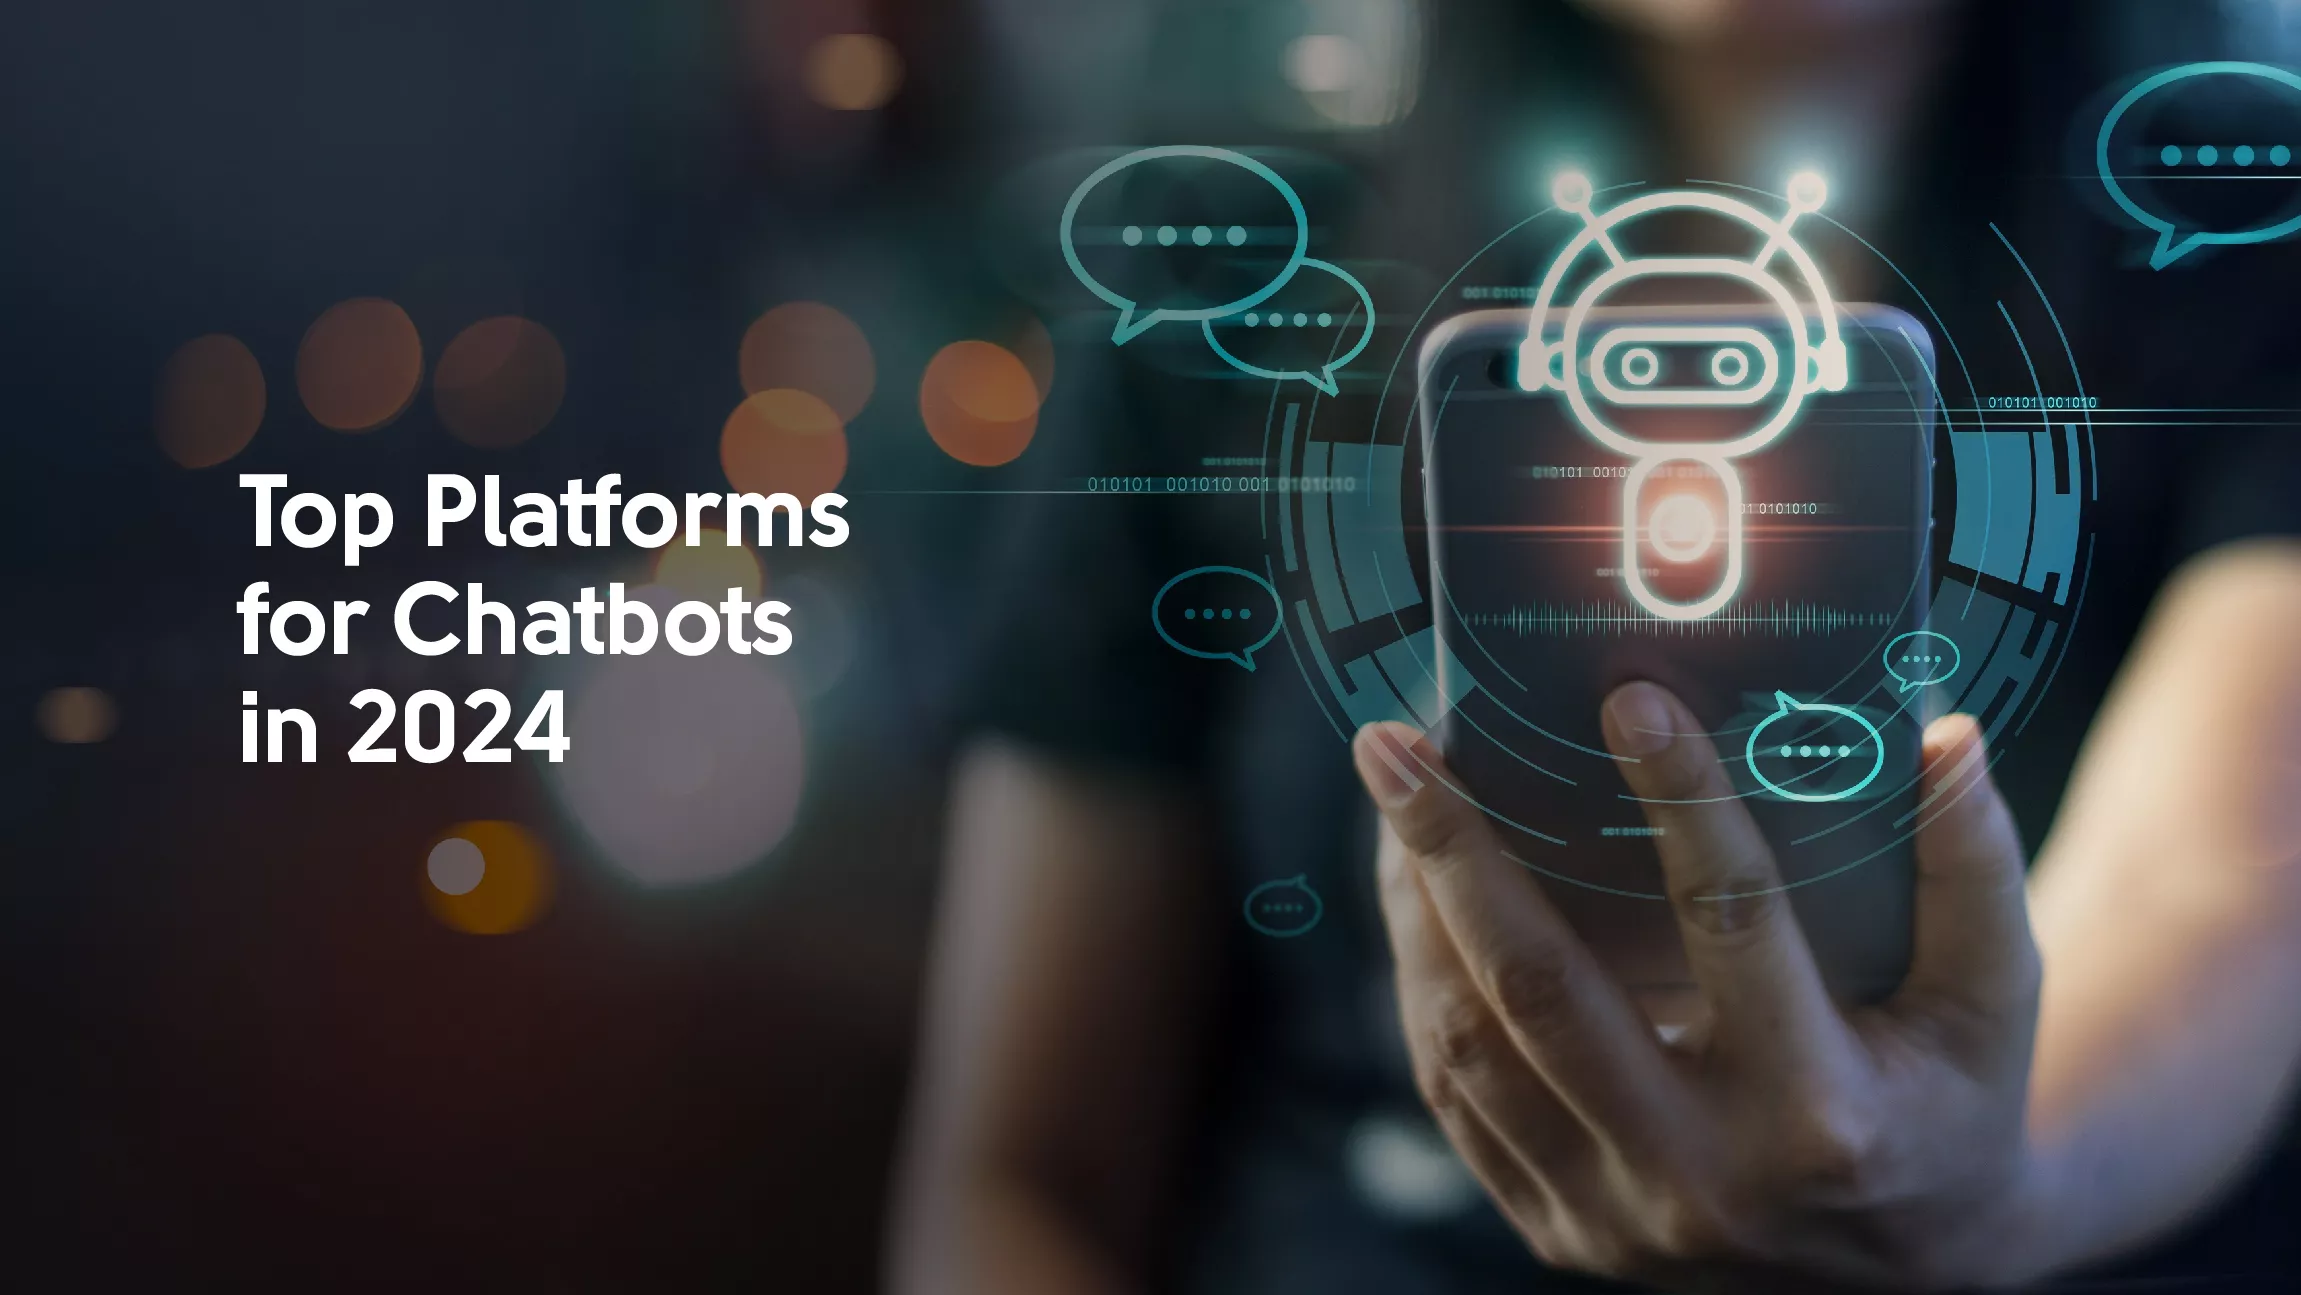 Top Platforms for Chatbots in 2024